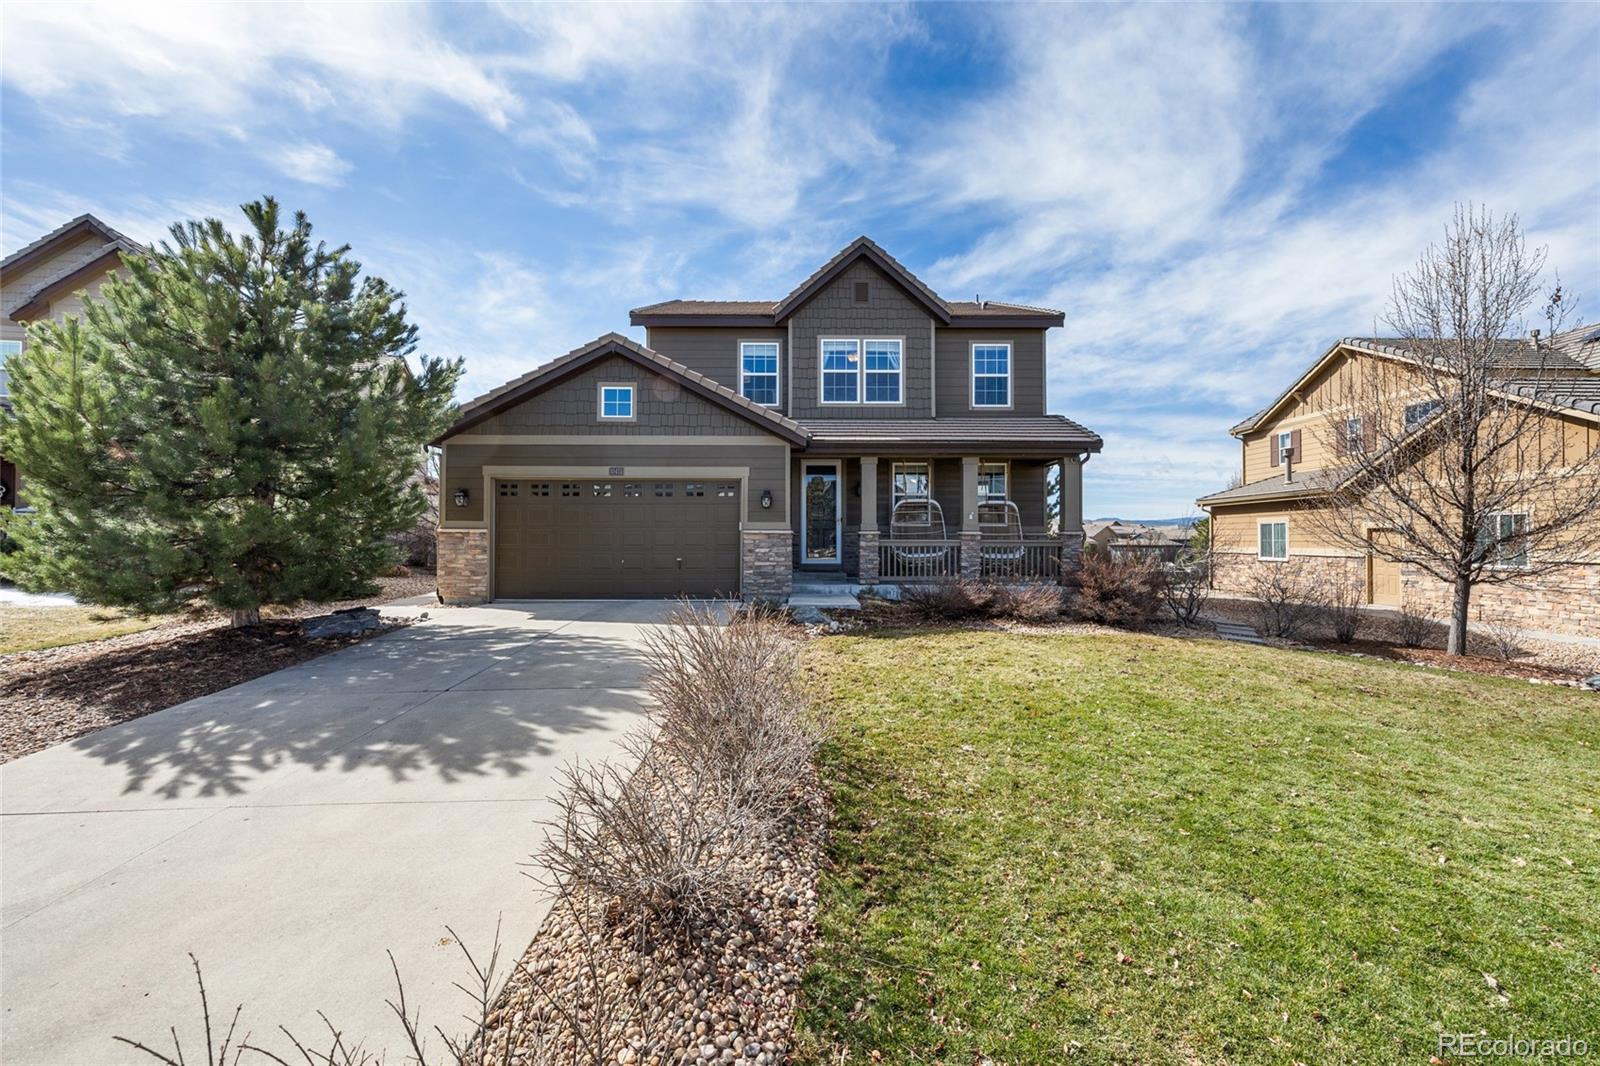 10451  meadowleaf way, Highlands Ranch sold home. Closed on 2024-04-26 for $1,245,000.